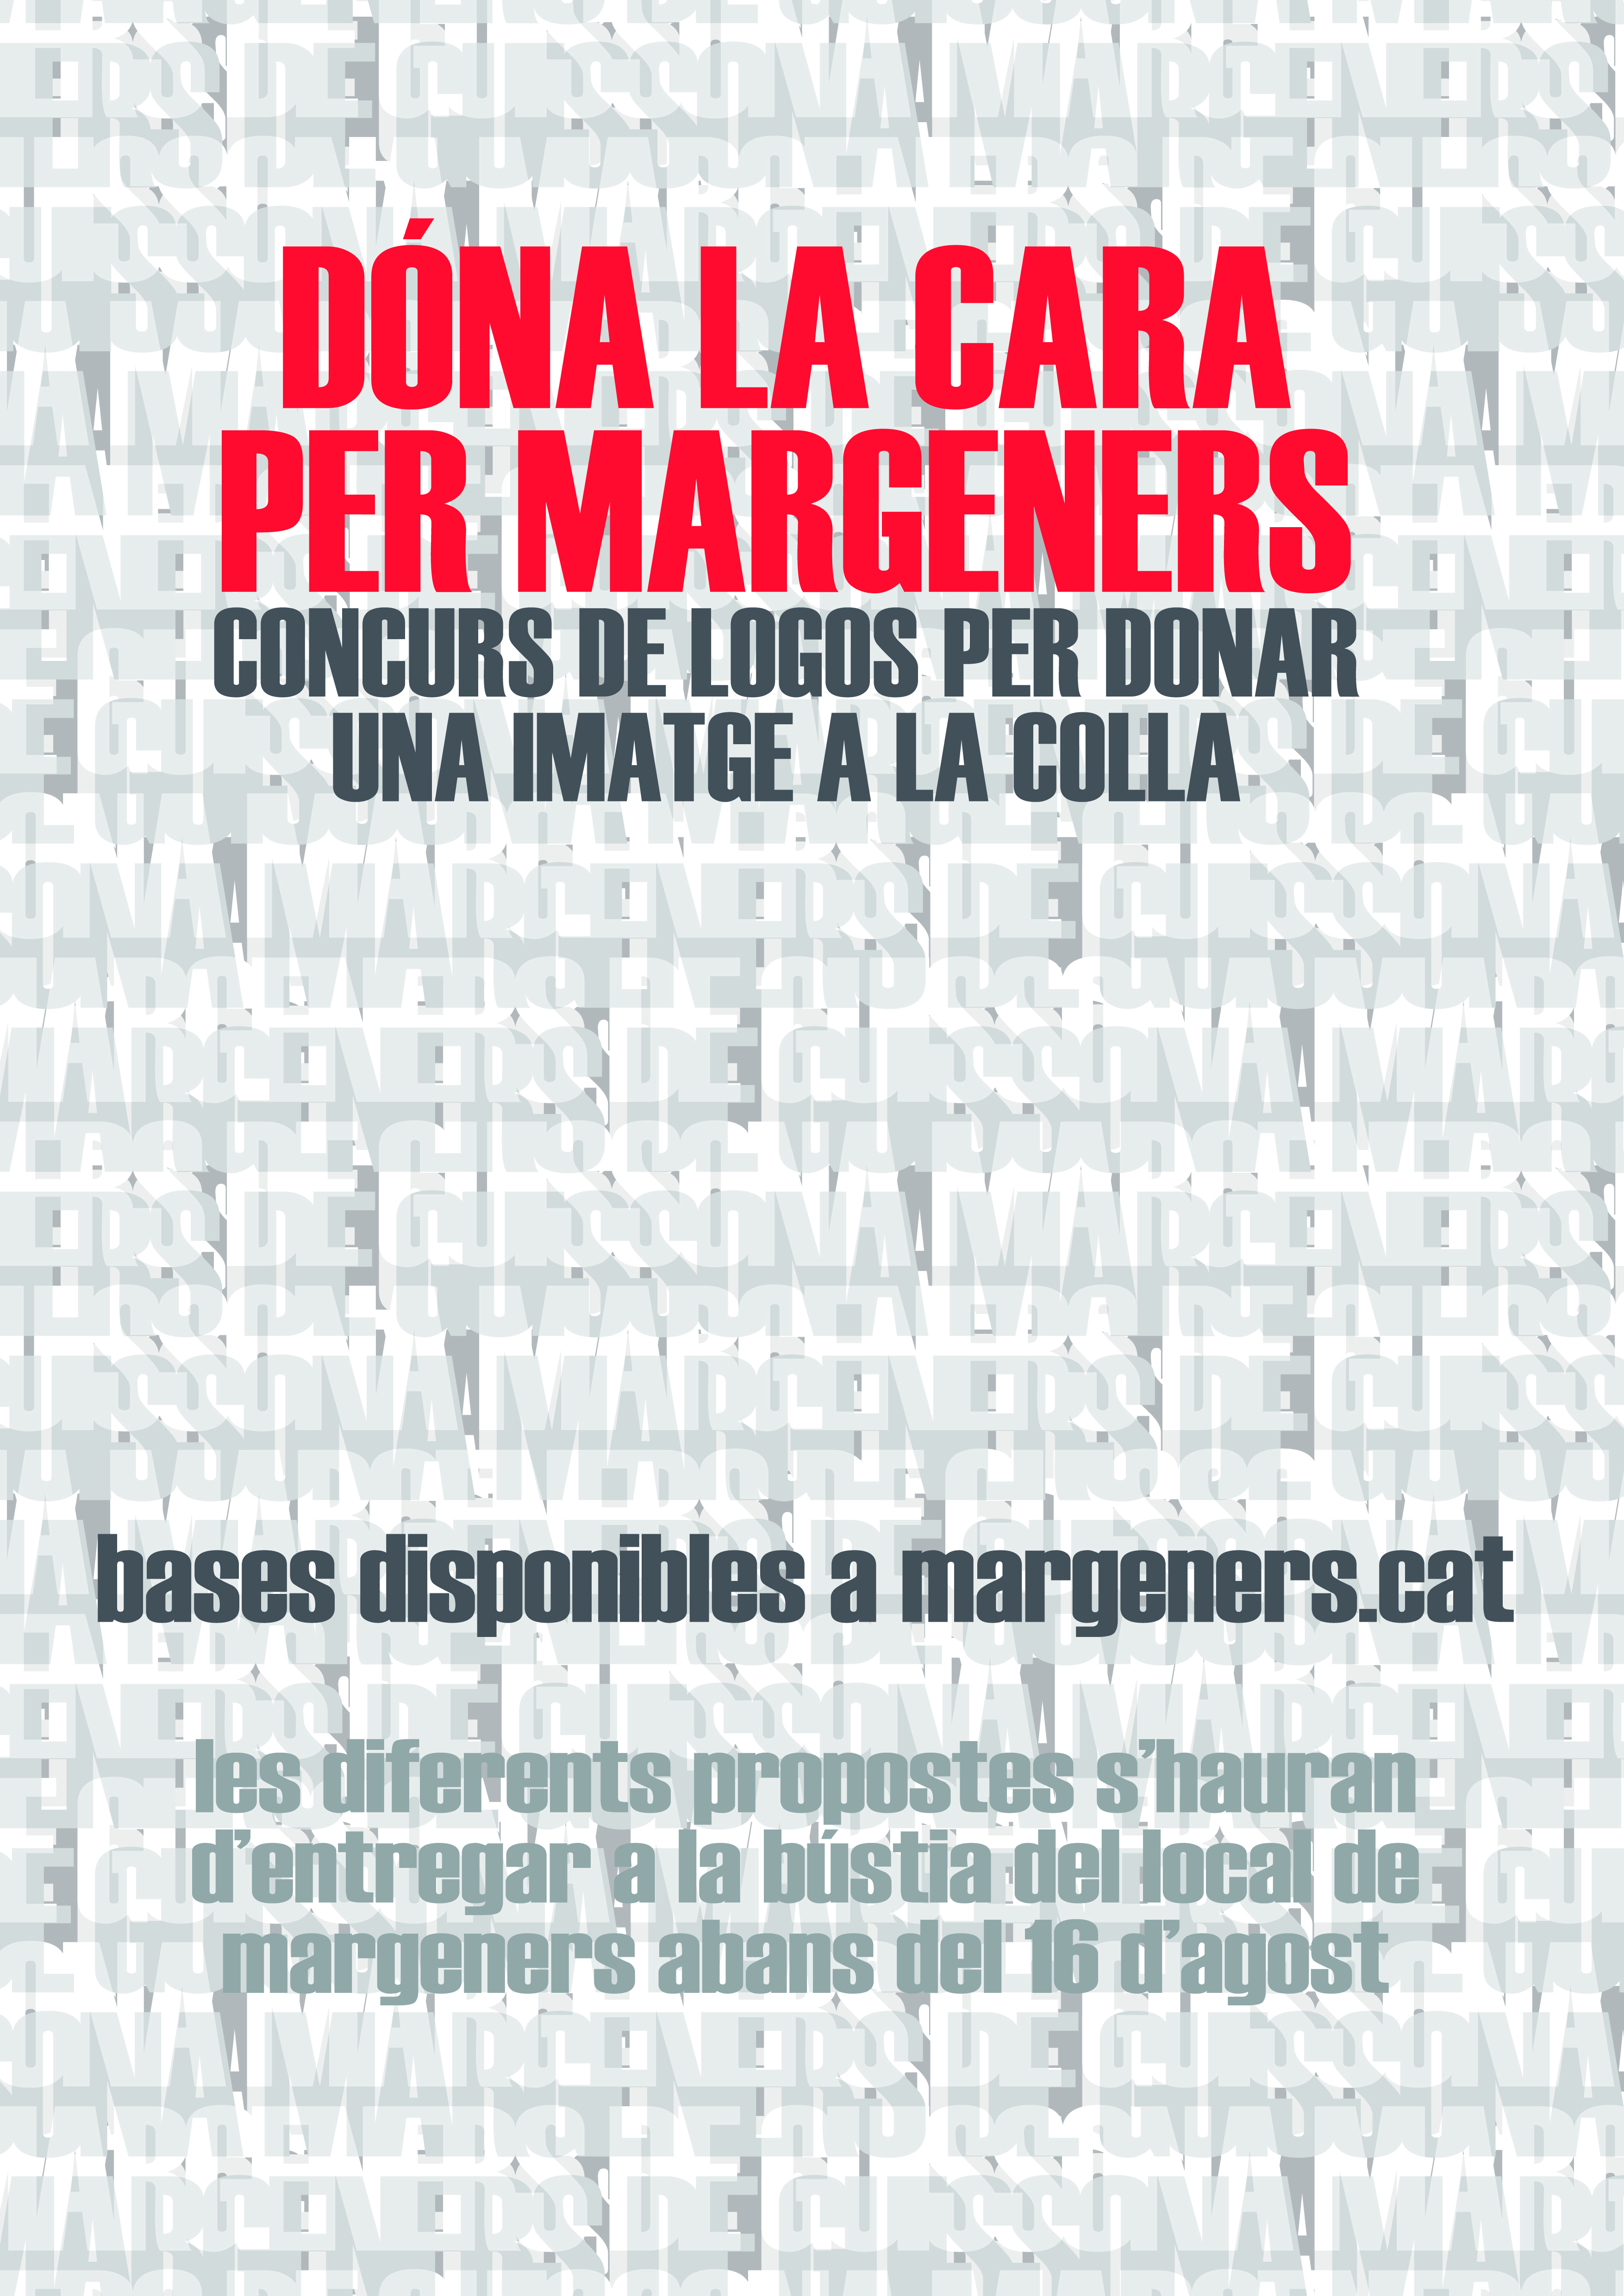 Concurs margeners